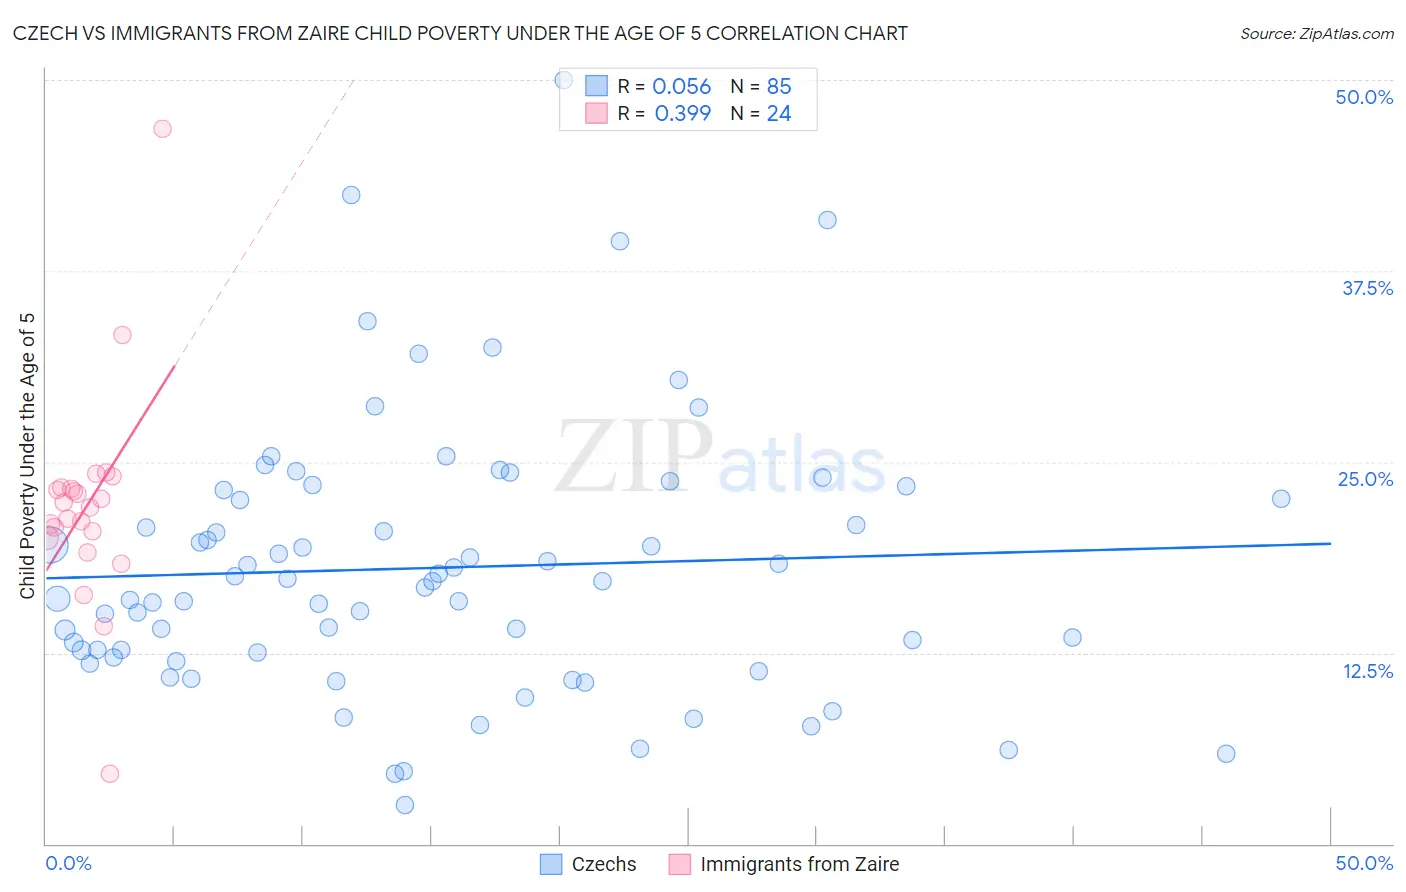 Czech vs Immigrants from Zaire Child Poverty Under the Age of 5